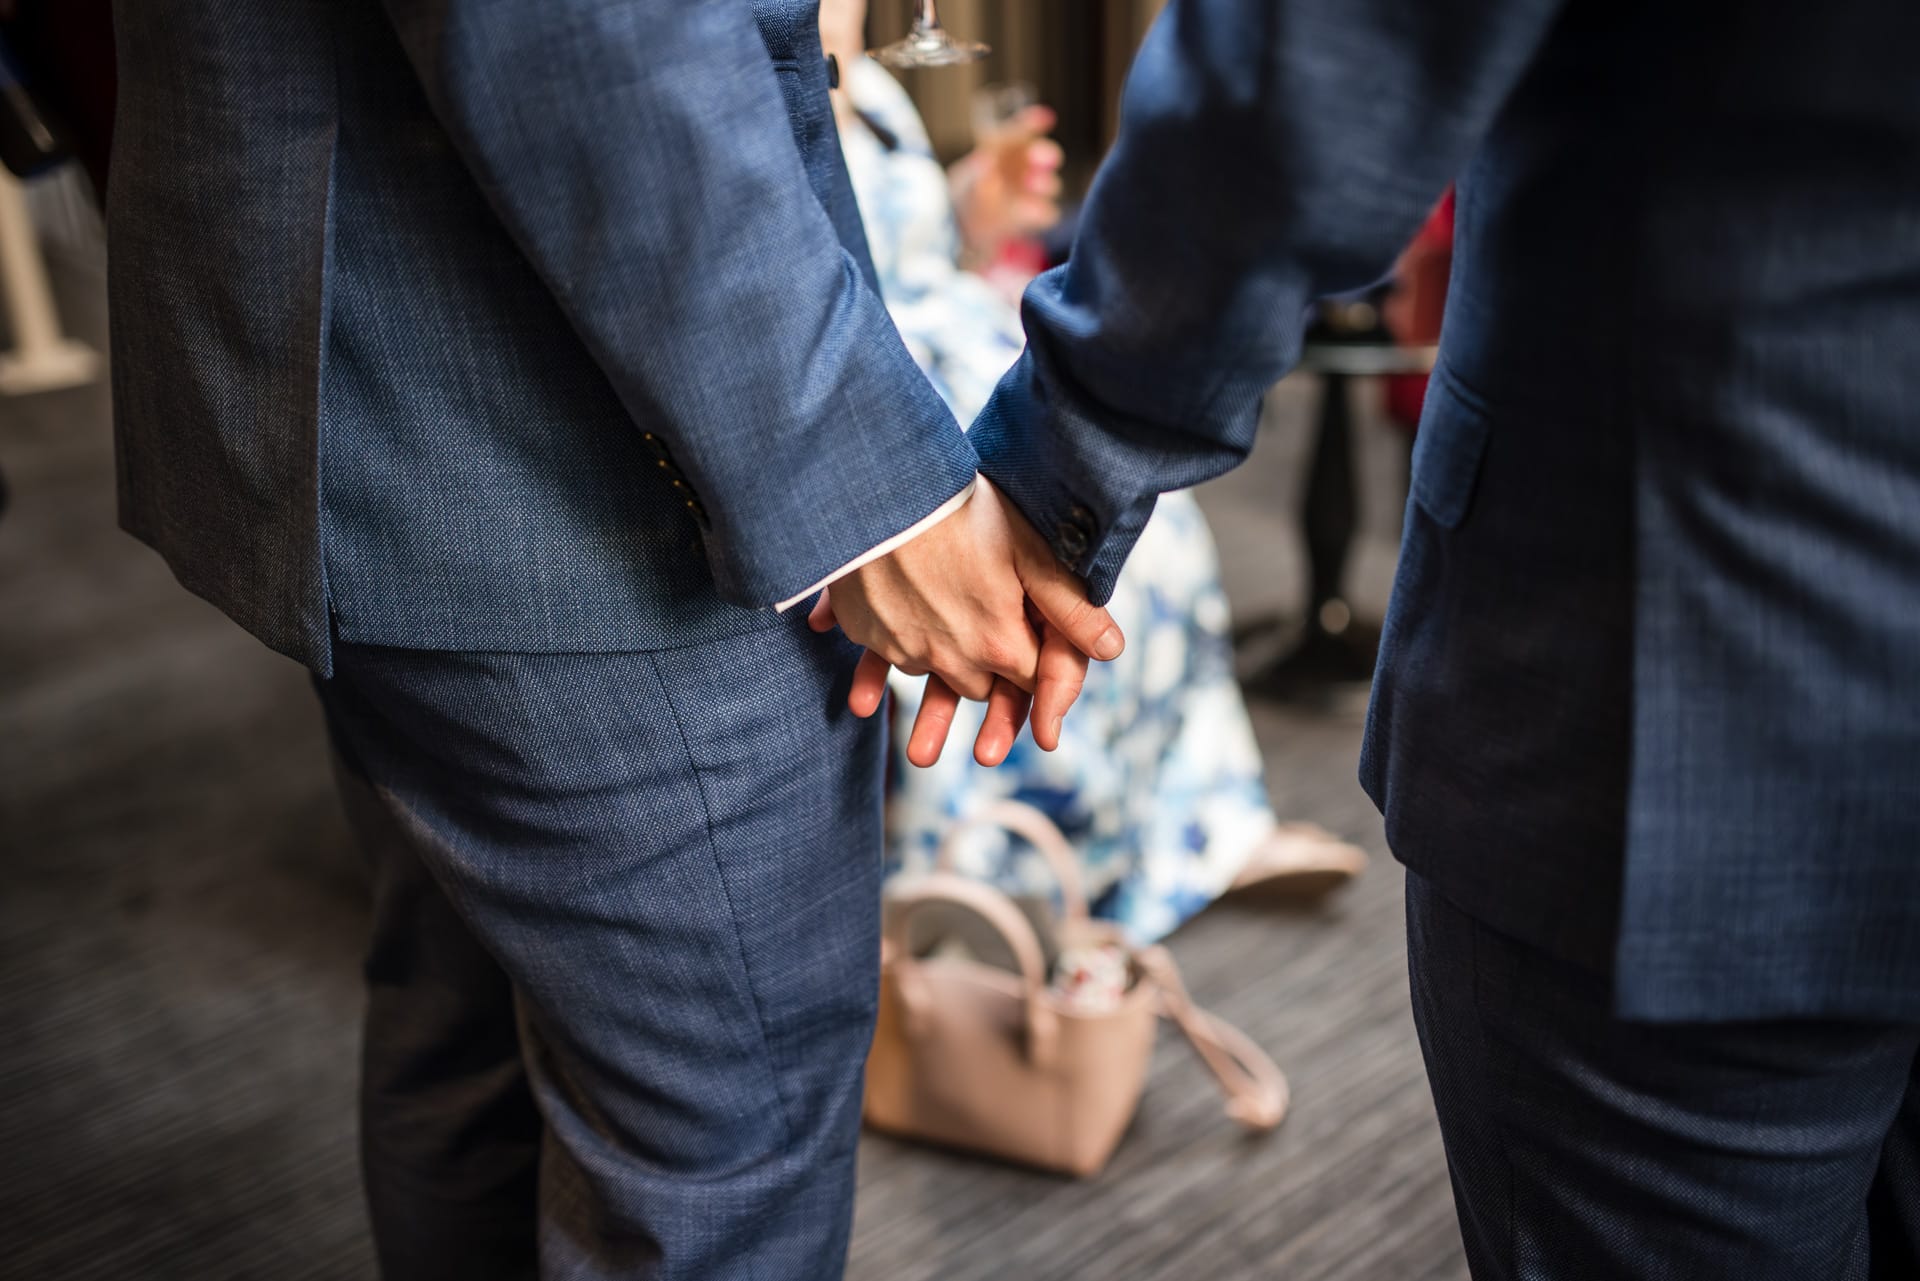 Grooms hold hands